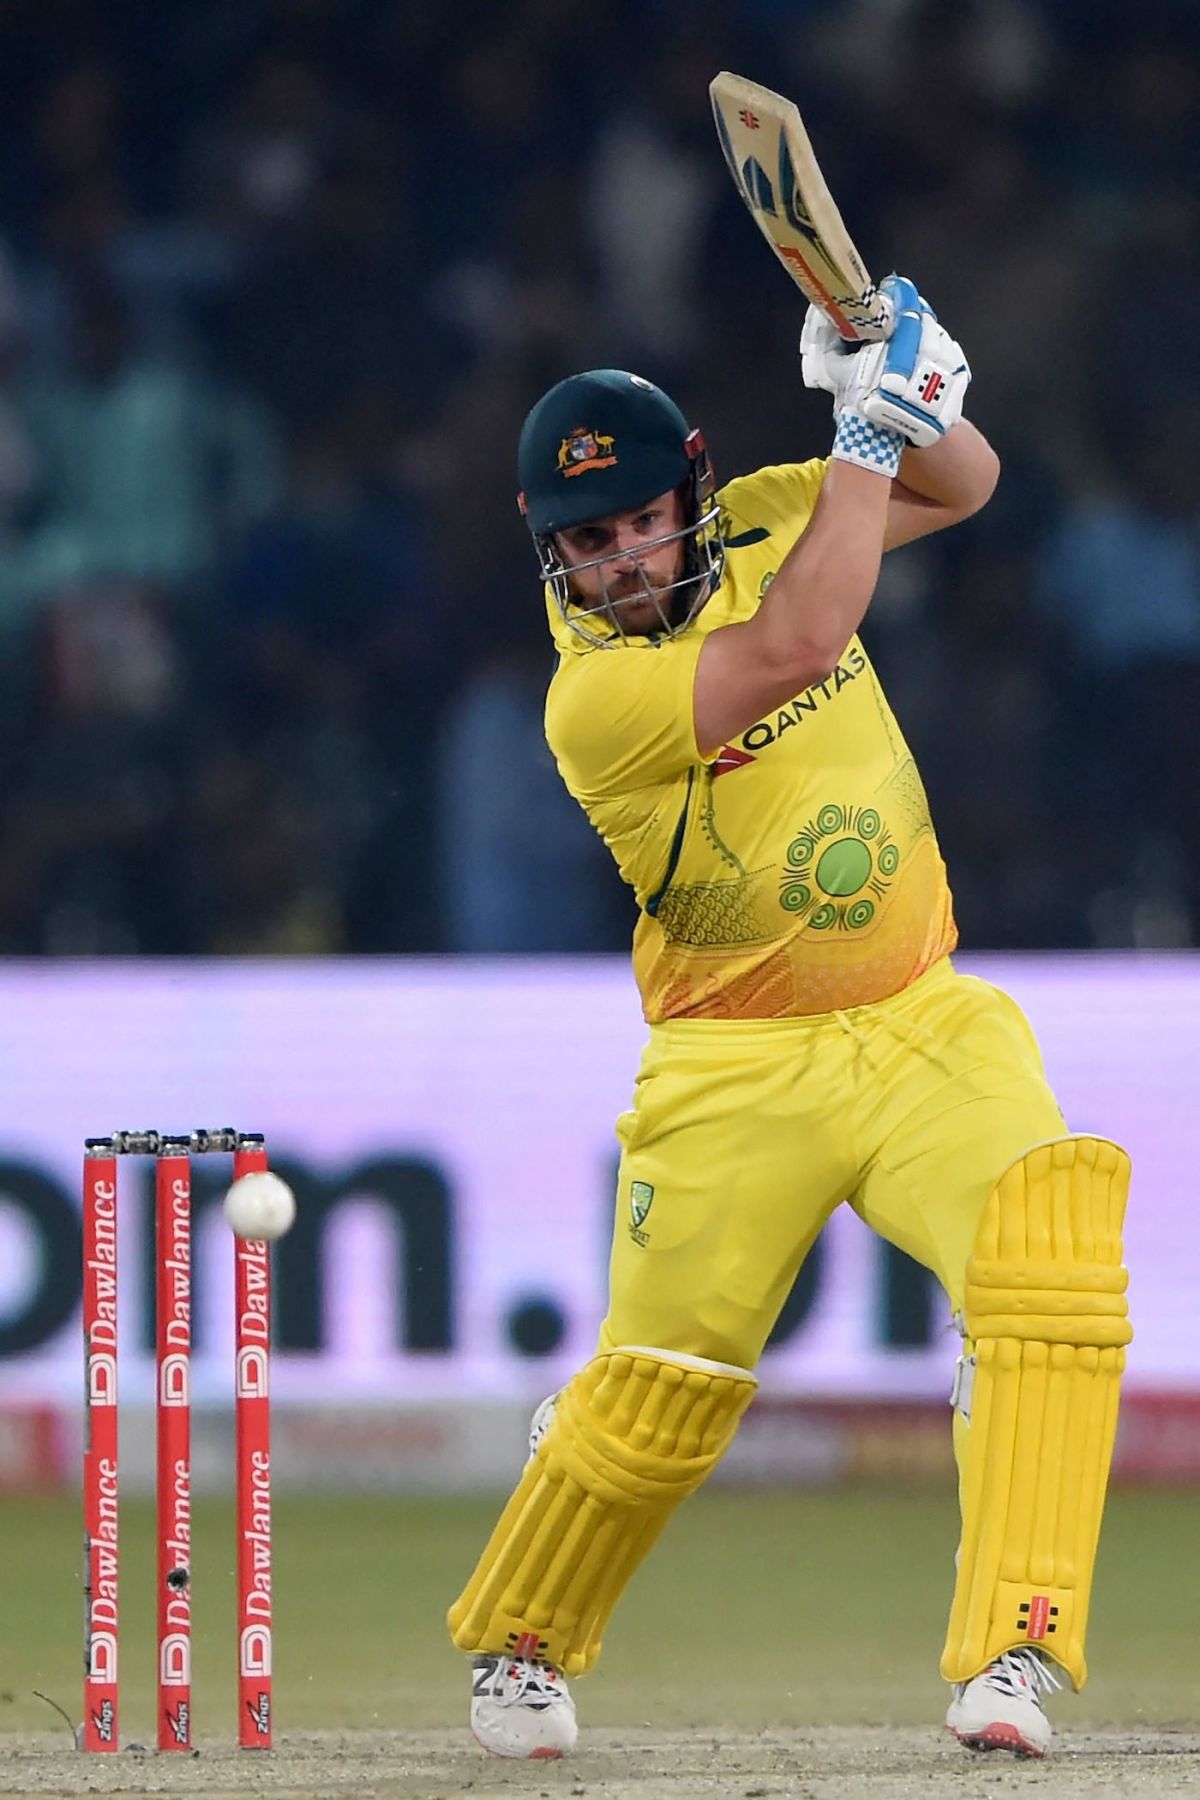 Aaron Finch powers the ball down the ground ESPNcricinfo